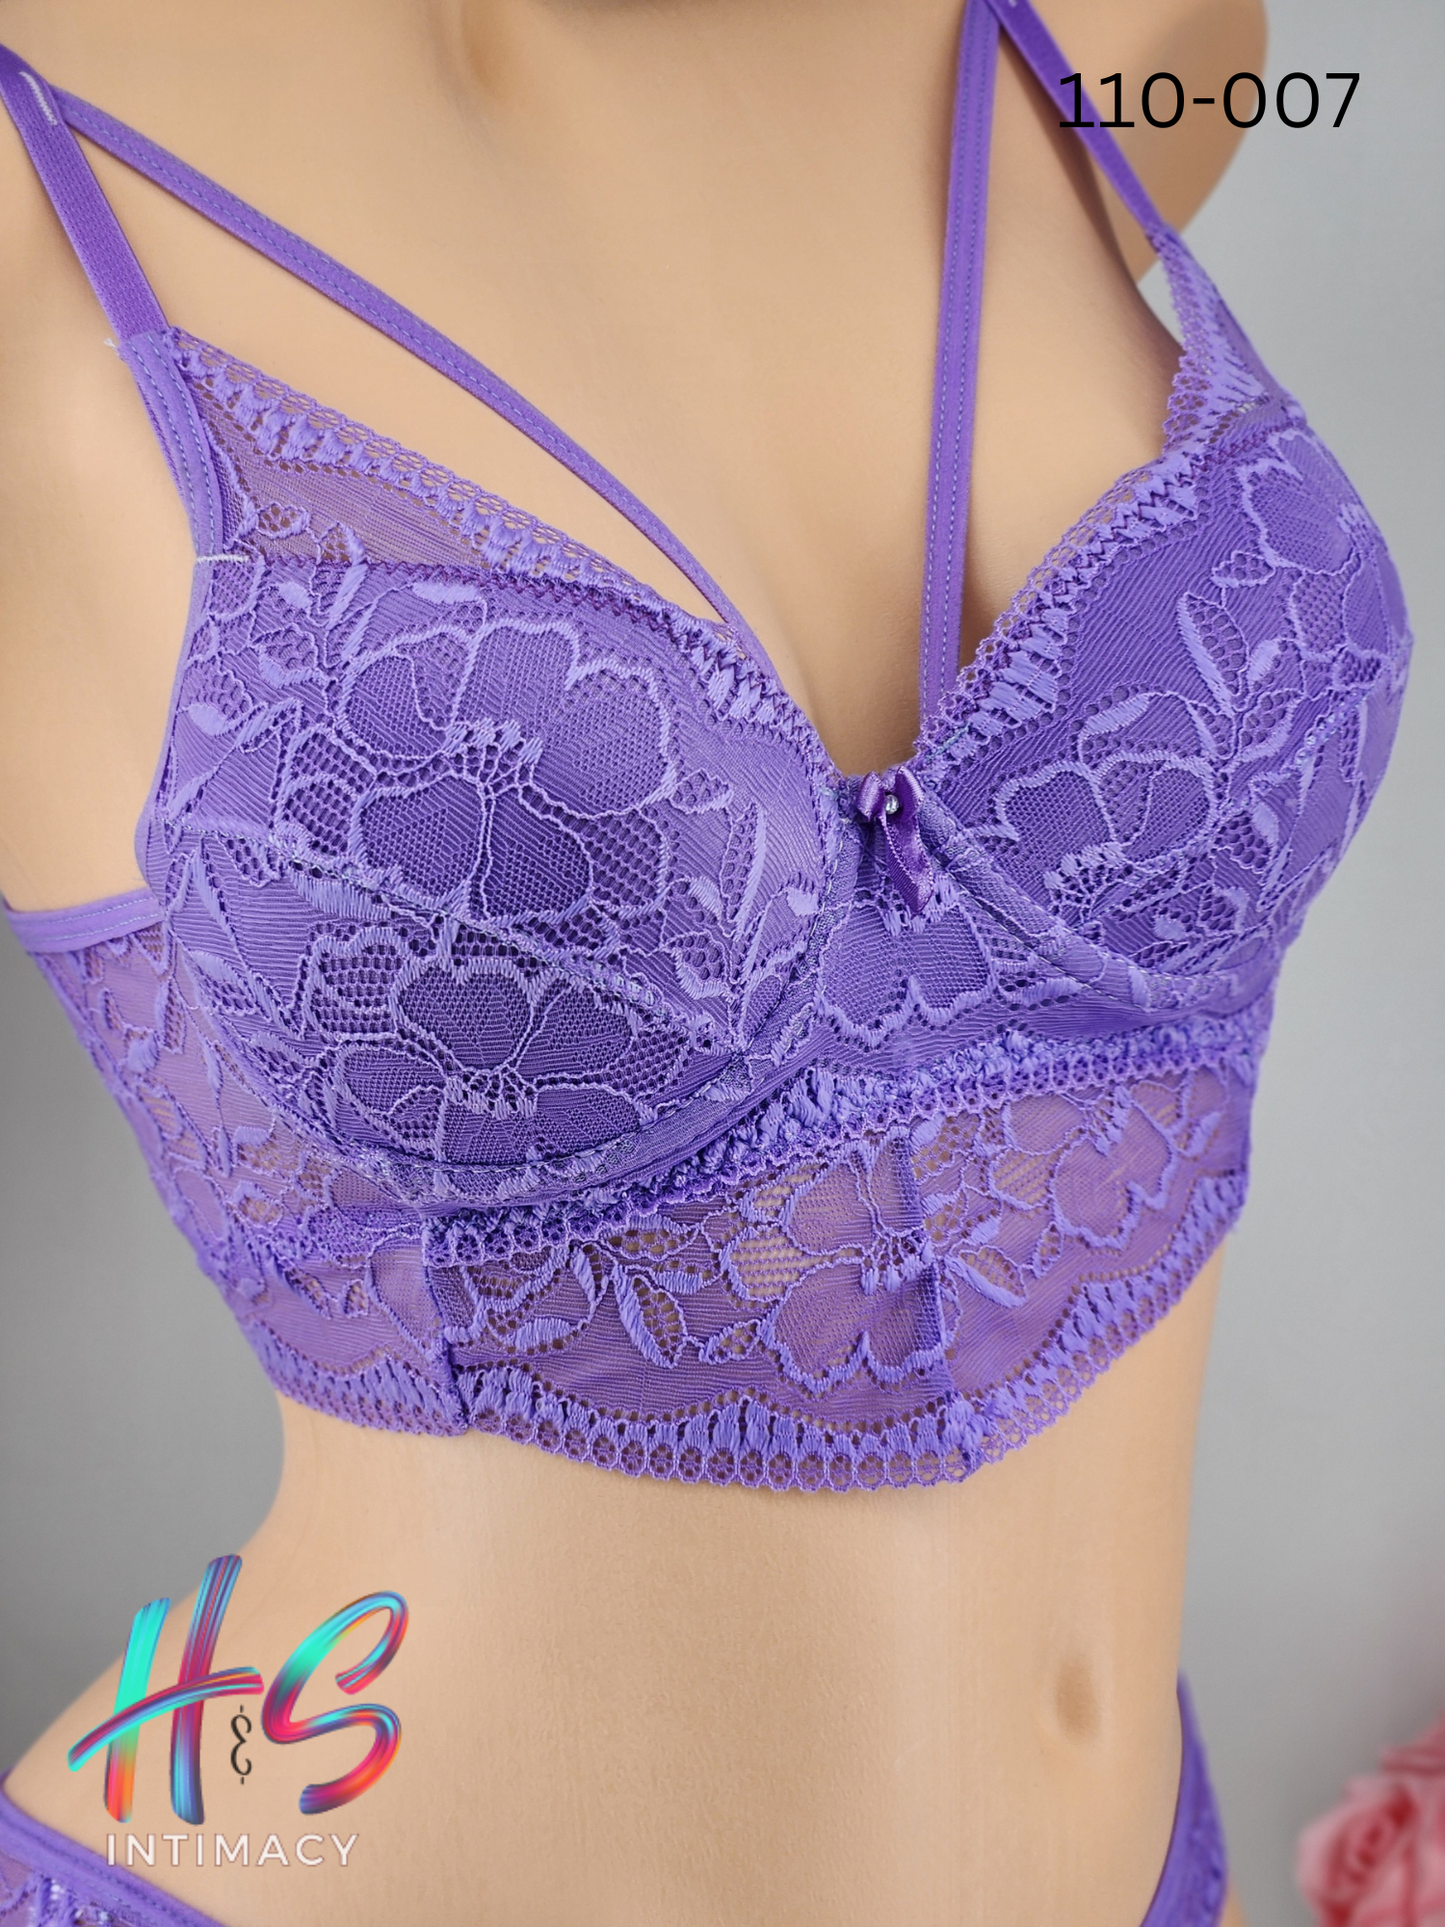 H&S Lingerie Collection 110-007